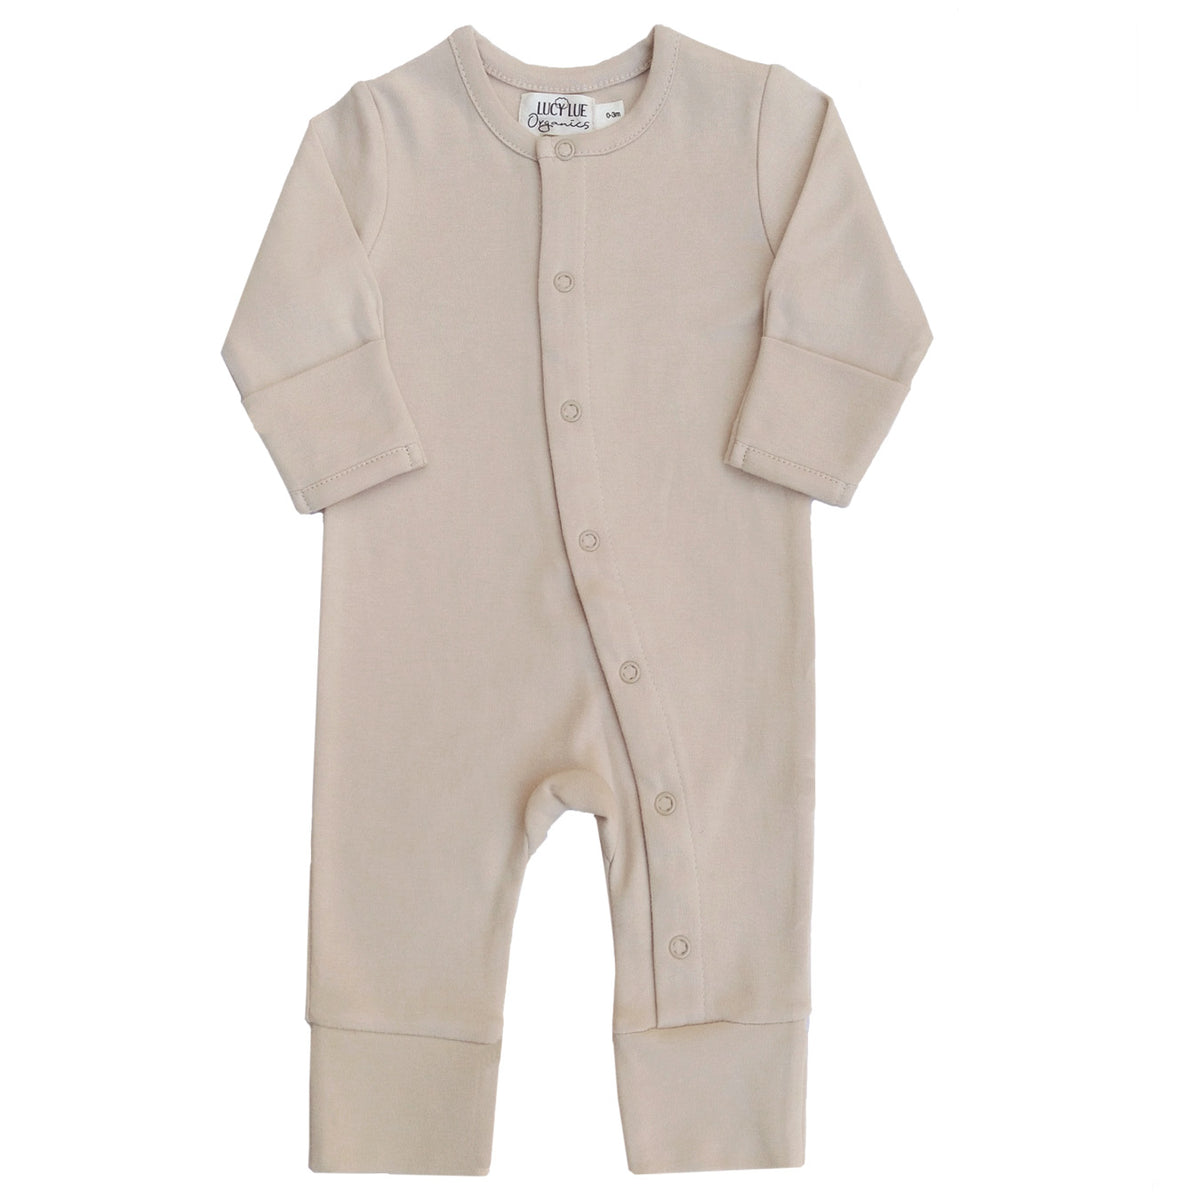 Organic Snap footie by Lucy Lue Organics. long sleeve baby romper. Organic baby clothes. Modern organic baby clothes. soft Baby rompers. organic baby bodysuit. baby snap romper. Footed sleepers. organic onesie, long sleeve romper, newborn baby clothes, L'oved baby romper jumpsuit. sustainable baby clothes, neutral solid color baby clothes